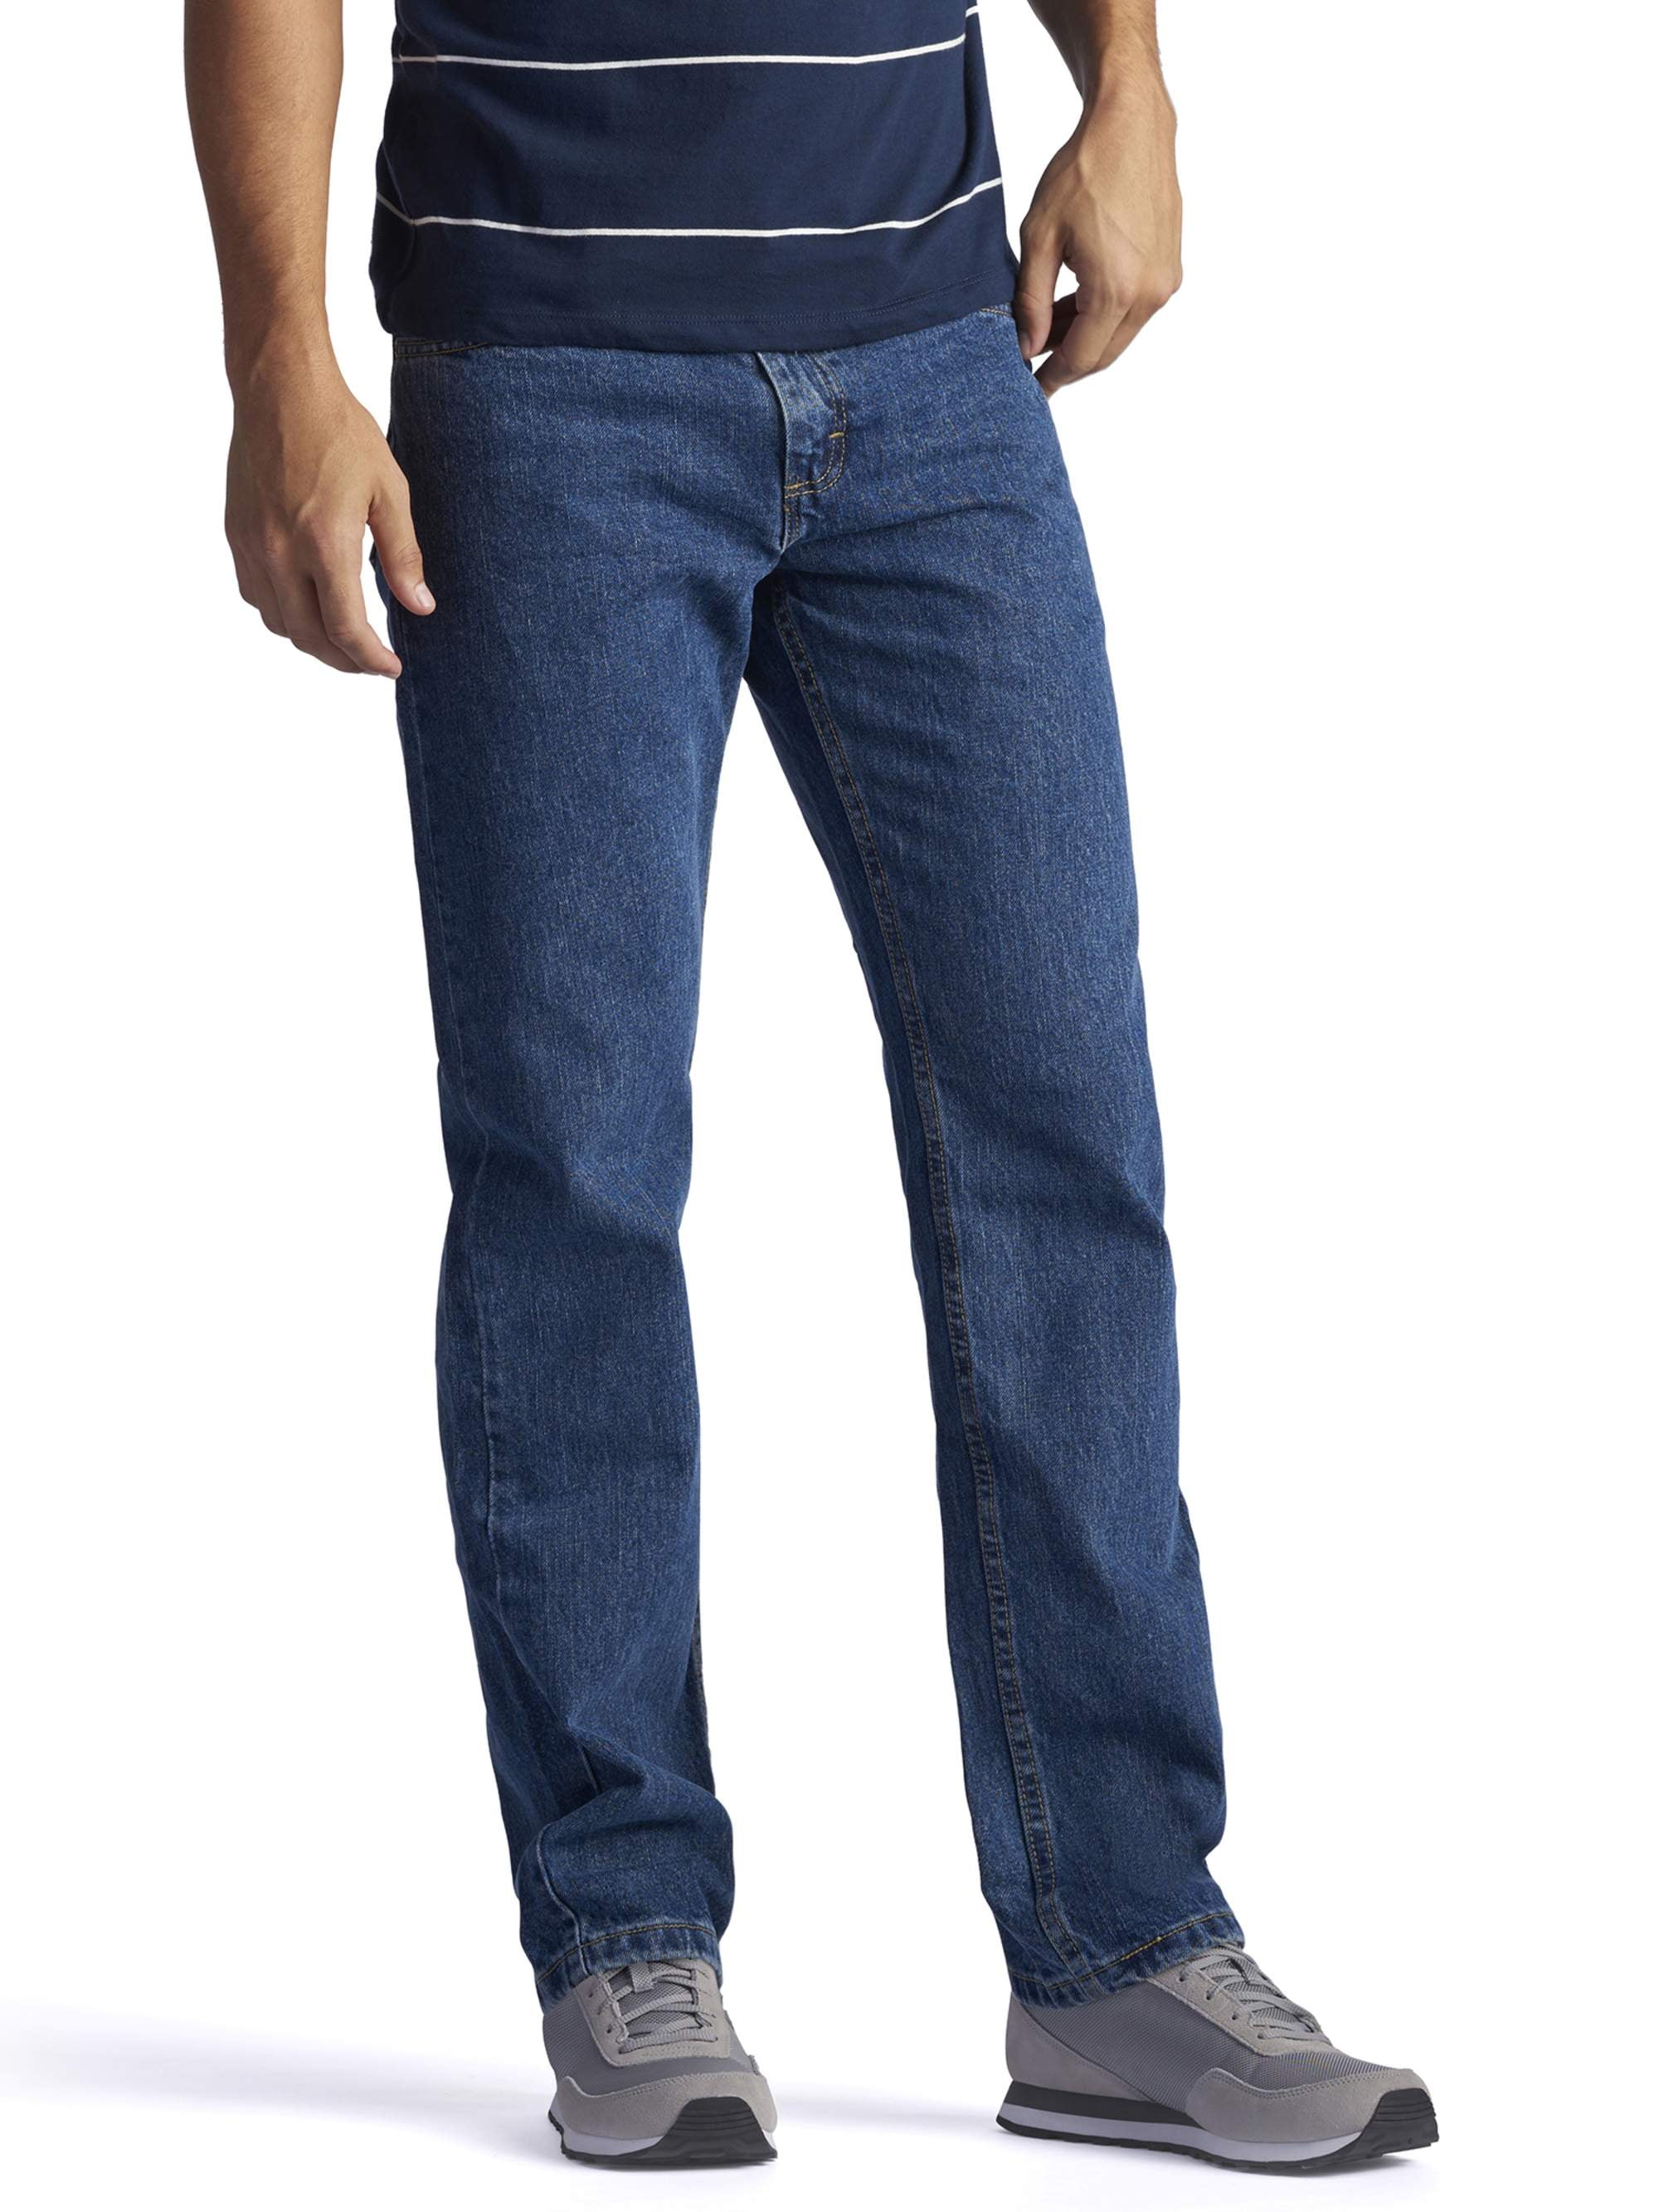 Lee Men's Relaxed Fit Jeans - Walmart.com